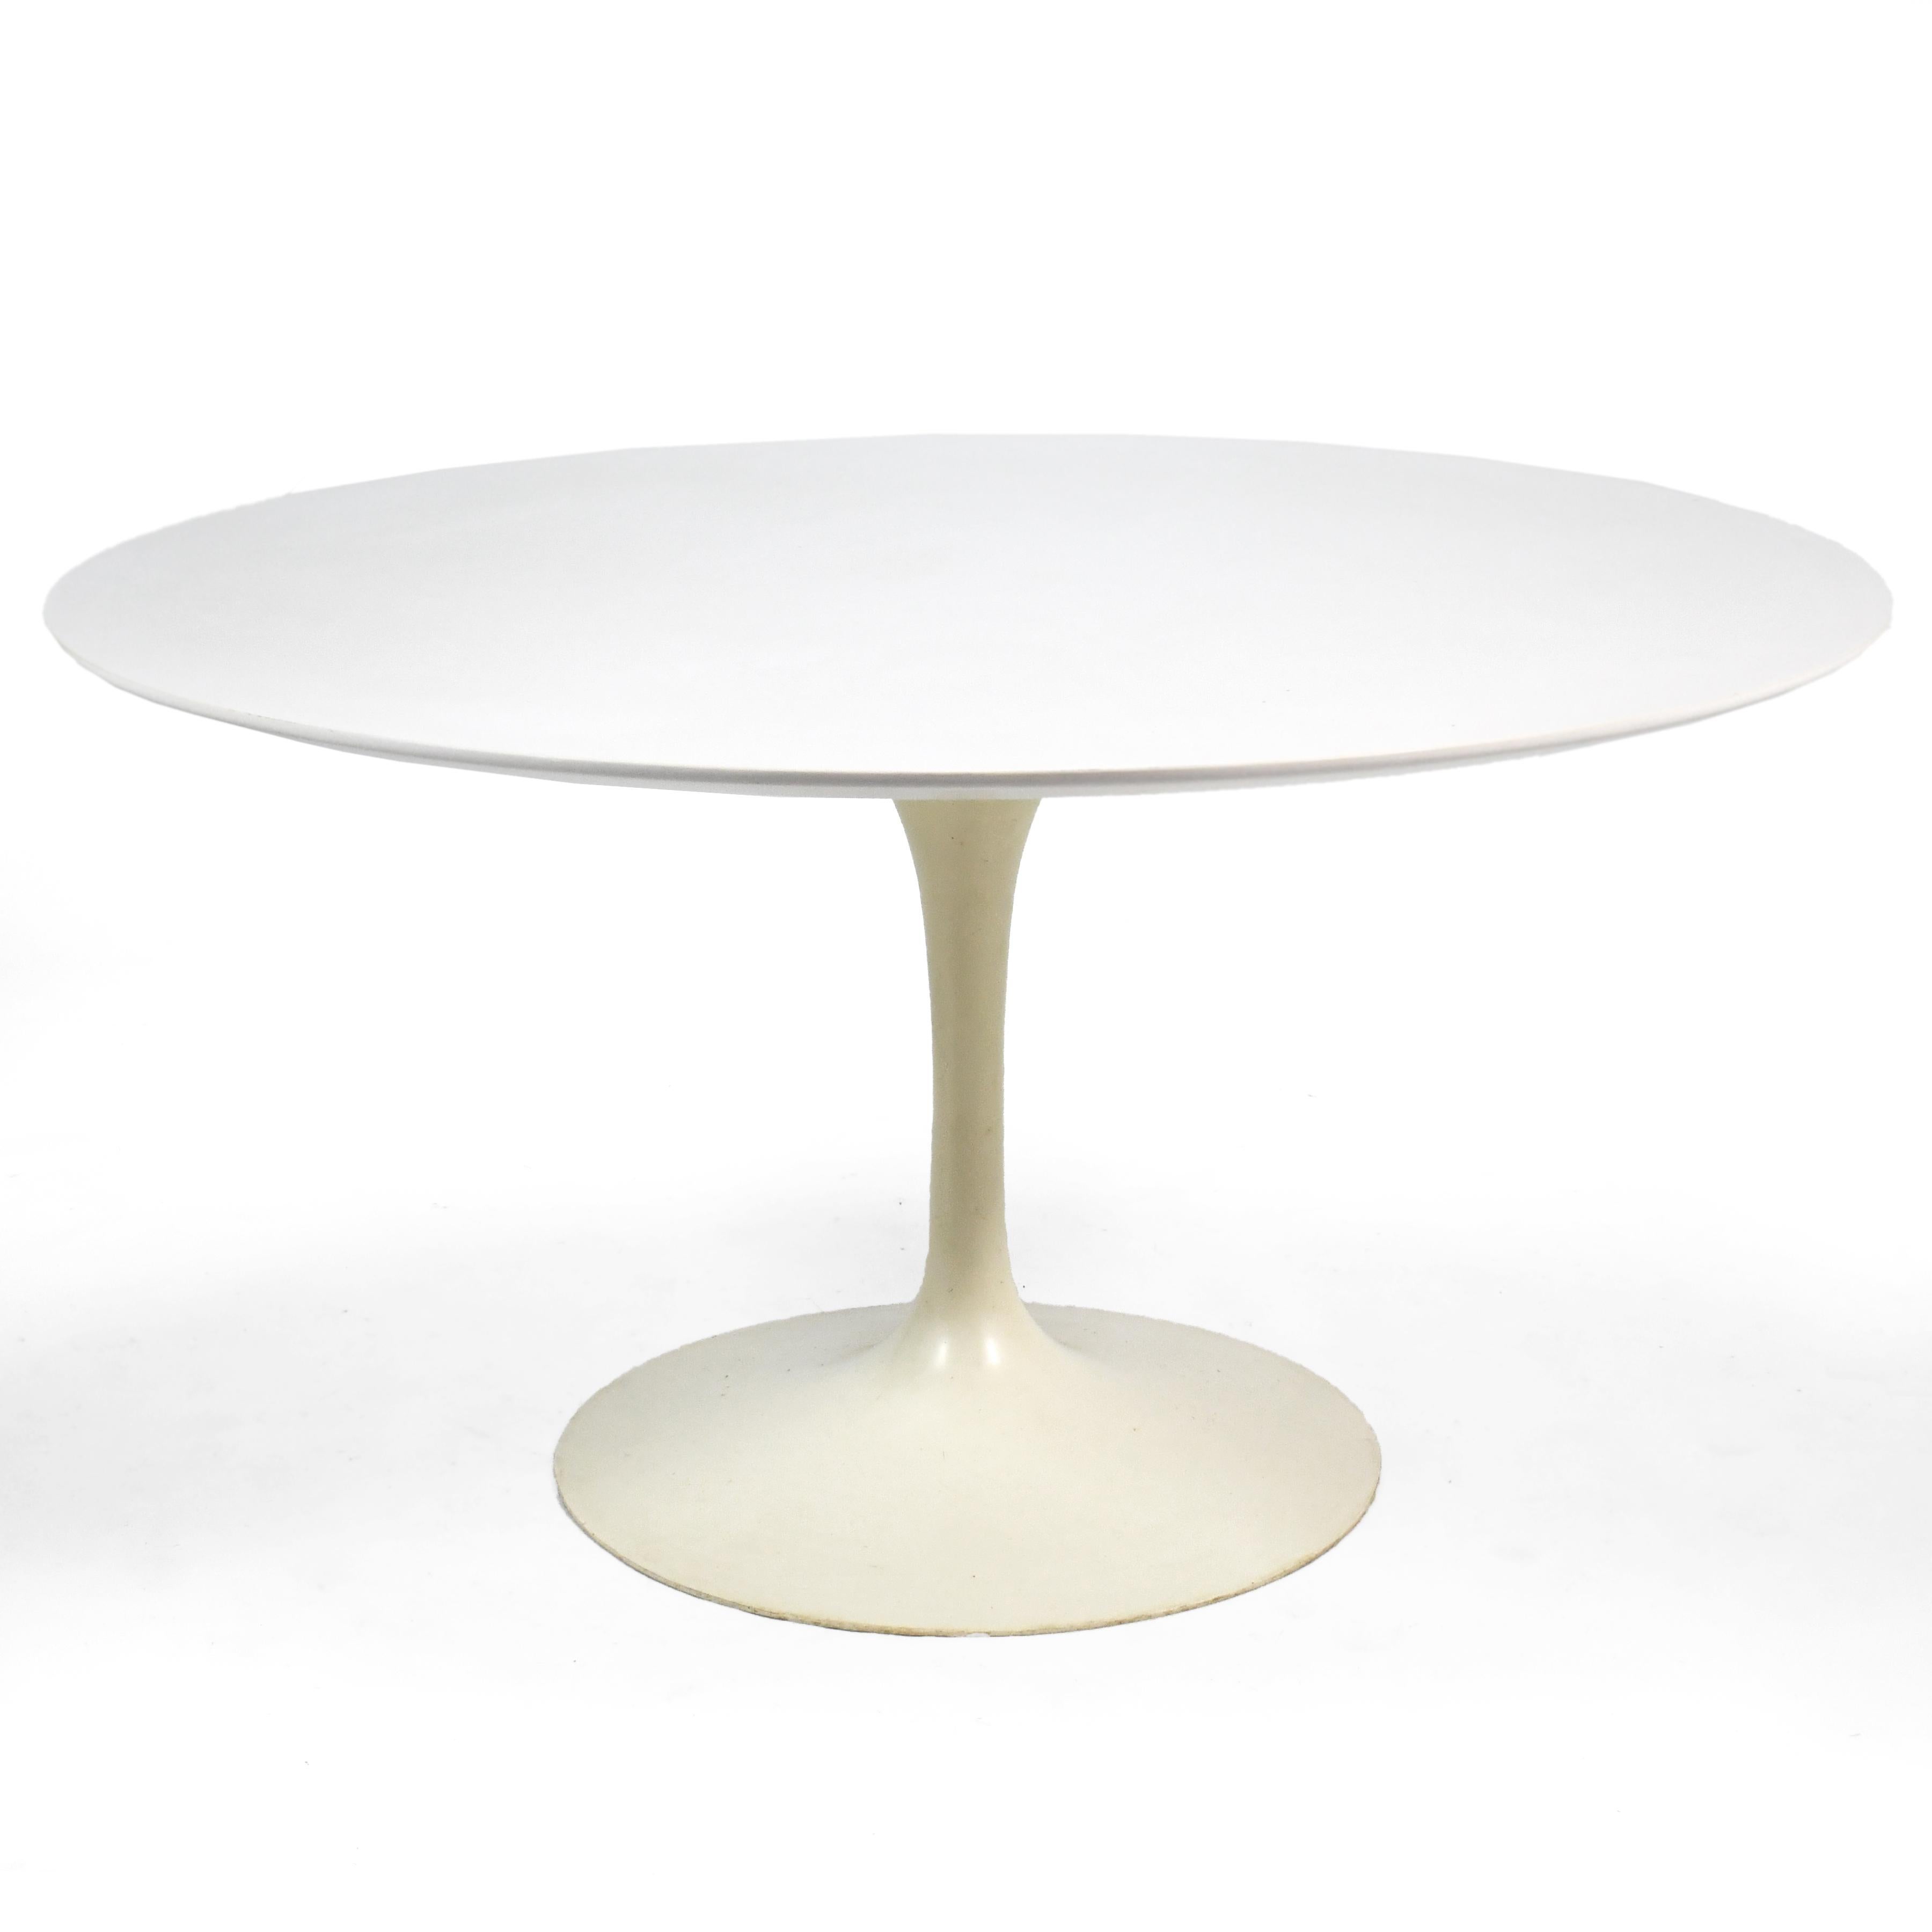 Saarinen's iconic design never goes out of style and works beautifully with almost any dining chairs. This wonderful vintage example from 1967 features a heavy base of cast iron supporting a white mica top. The finish on the base has patinated and